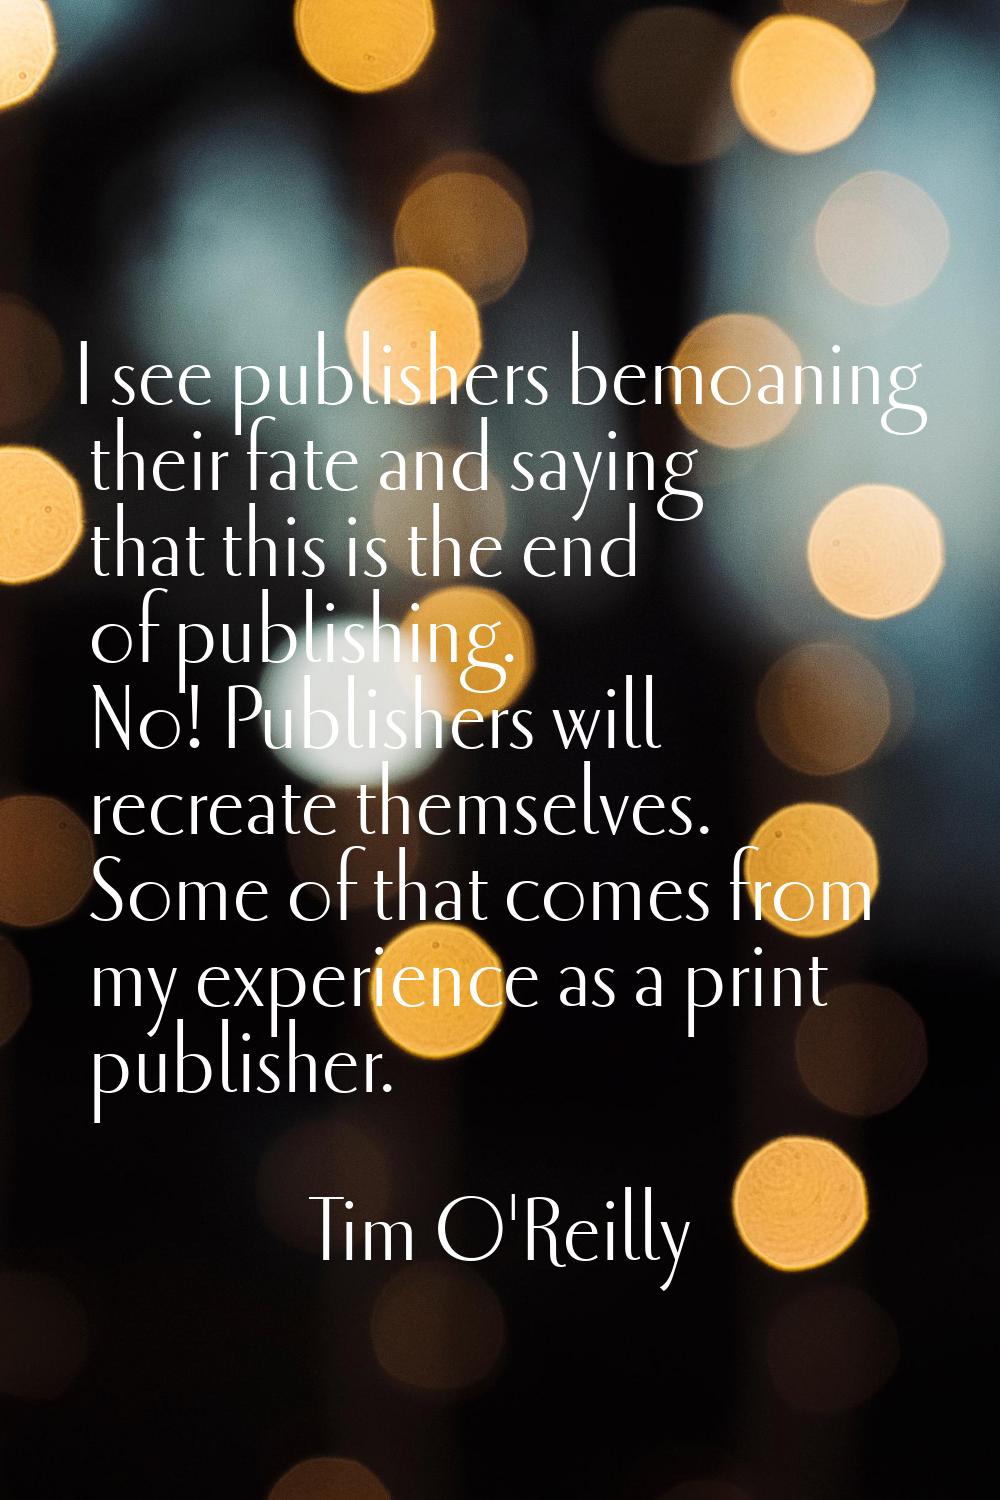 I see publishers bemoaning their fate and saying that this is the end of publishing. No! Publishers